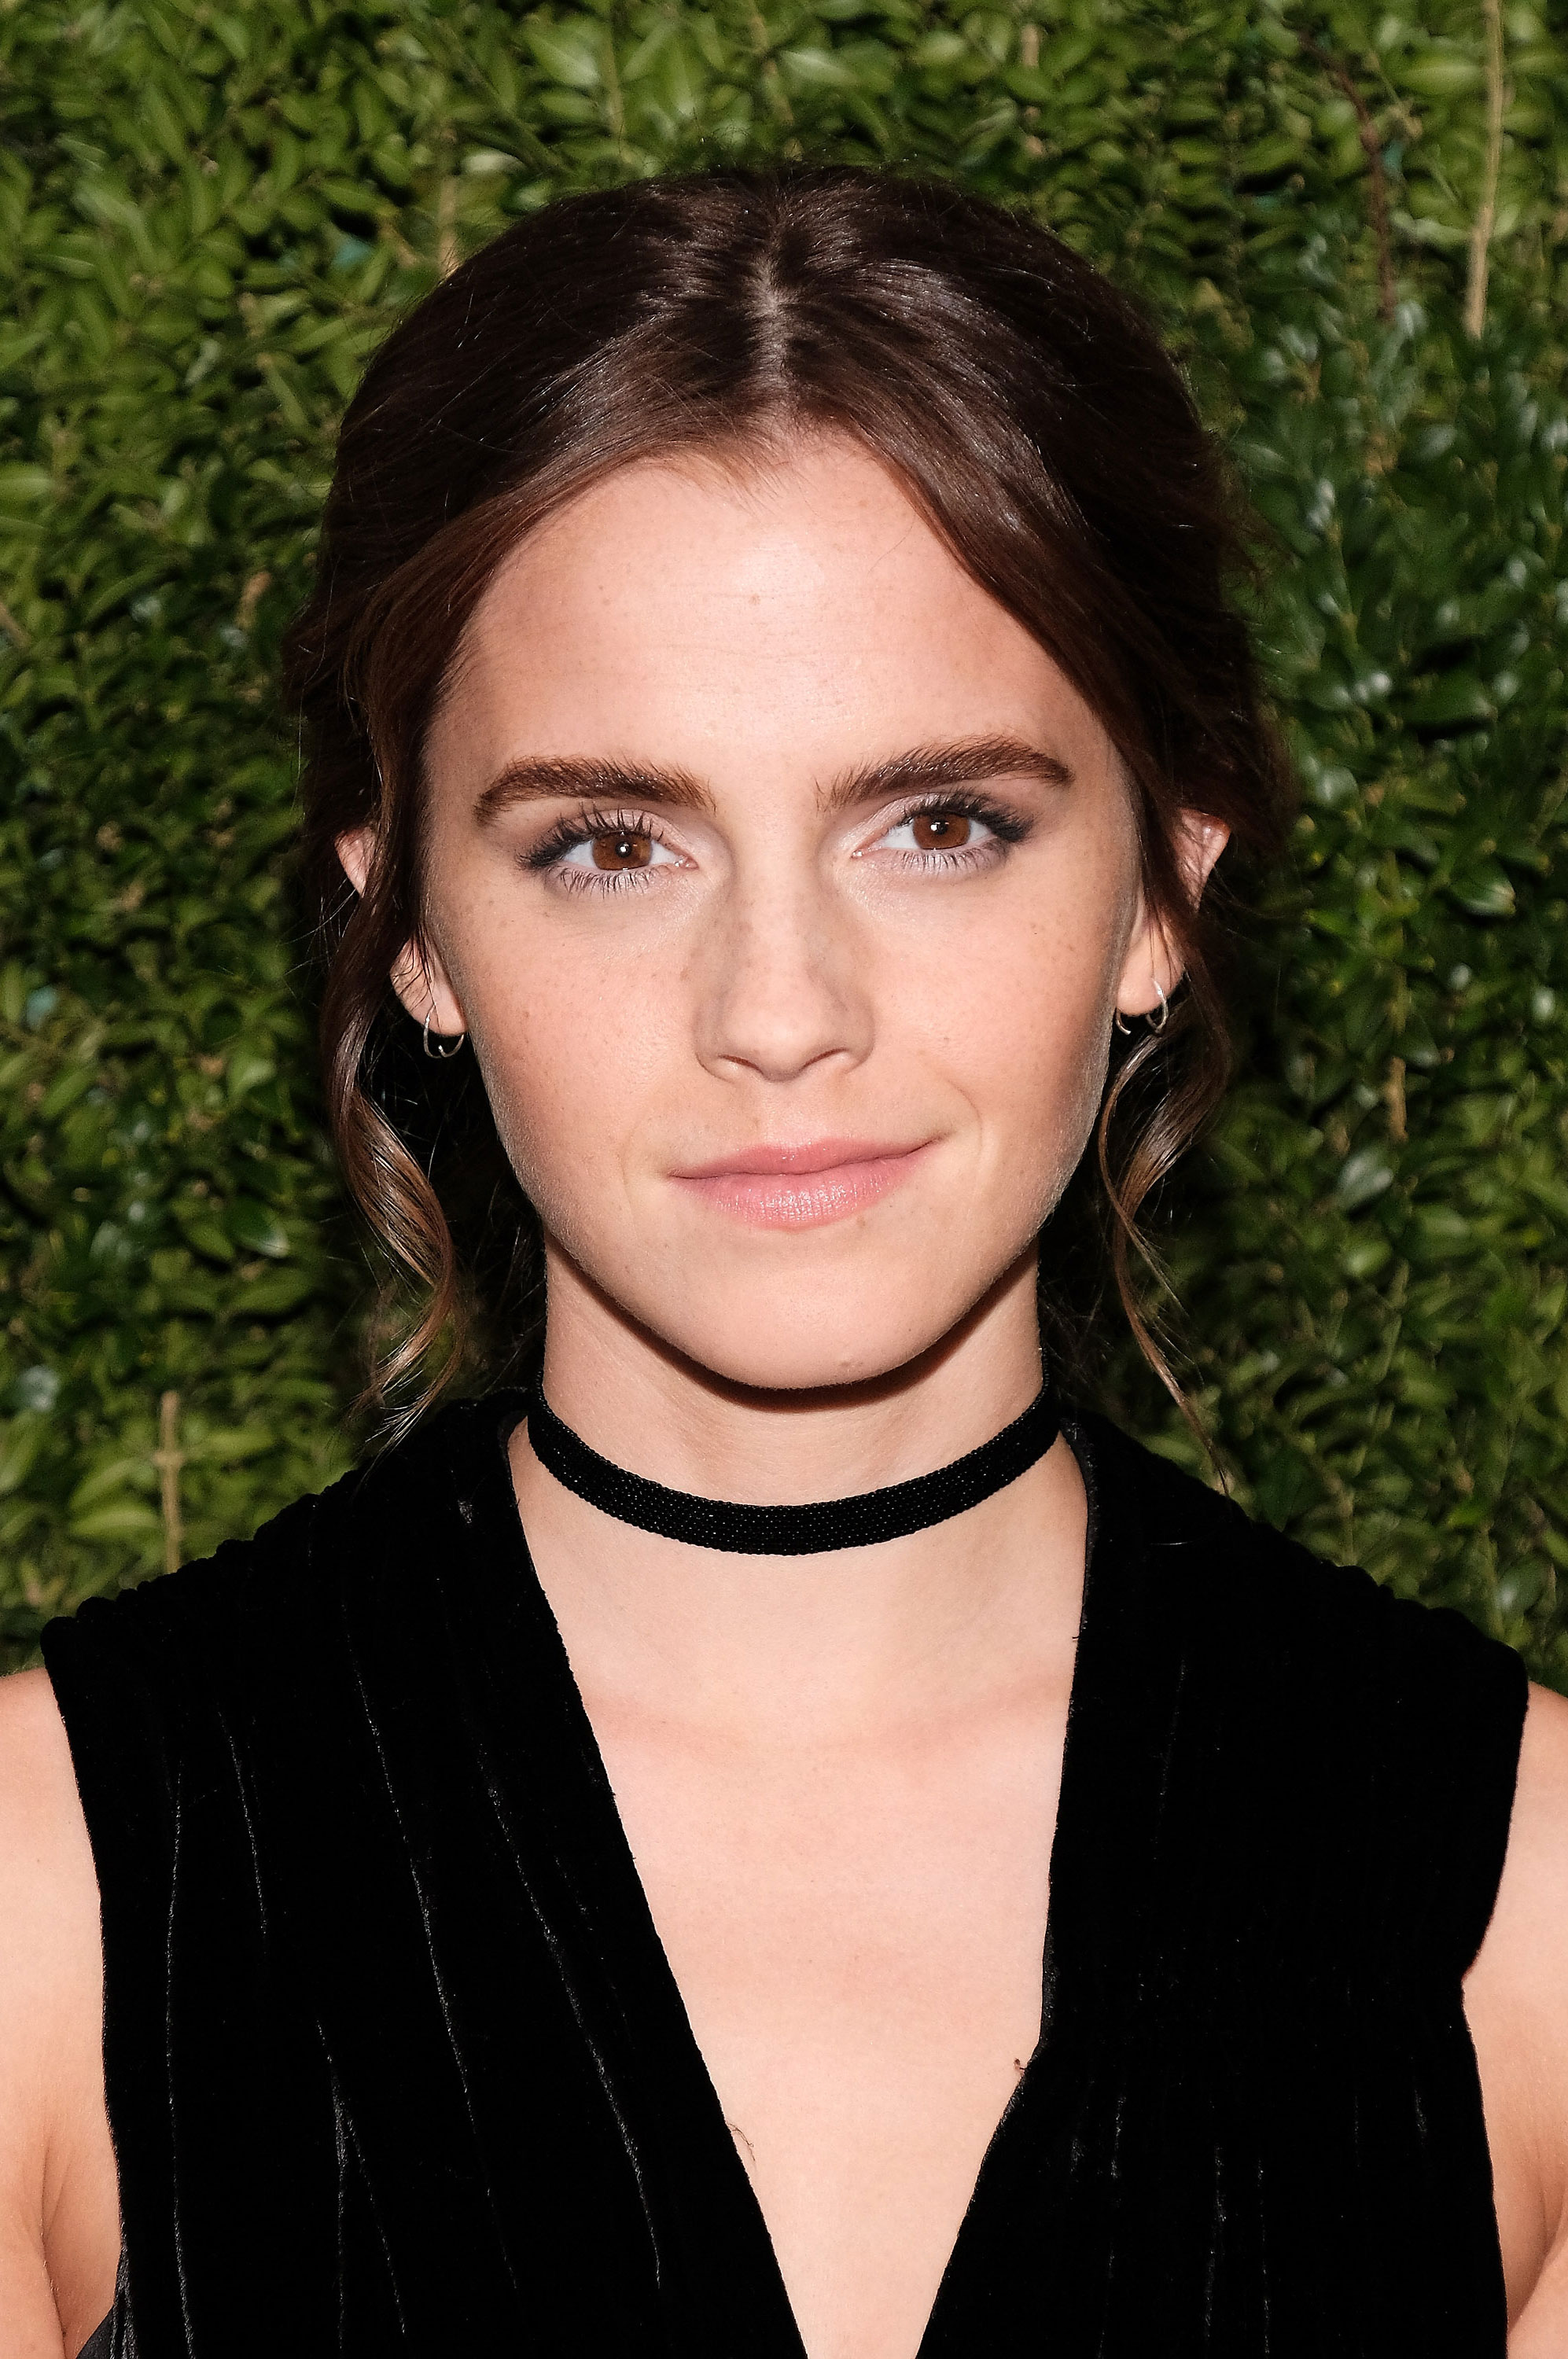 Emma Watson Channels Princess Belle With New Hair BEAUTY Crew